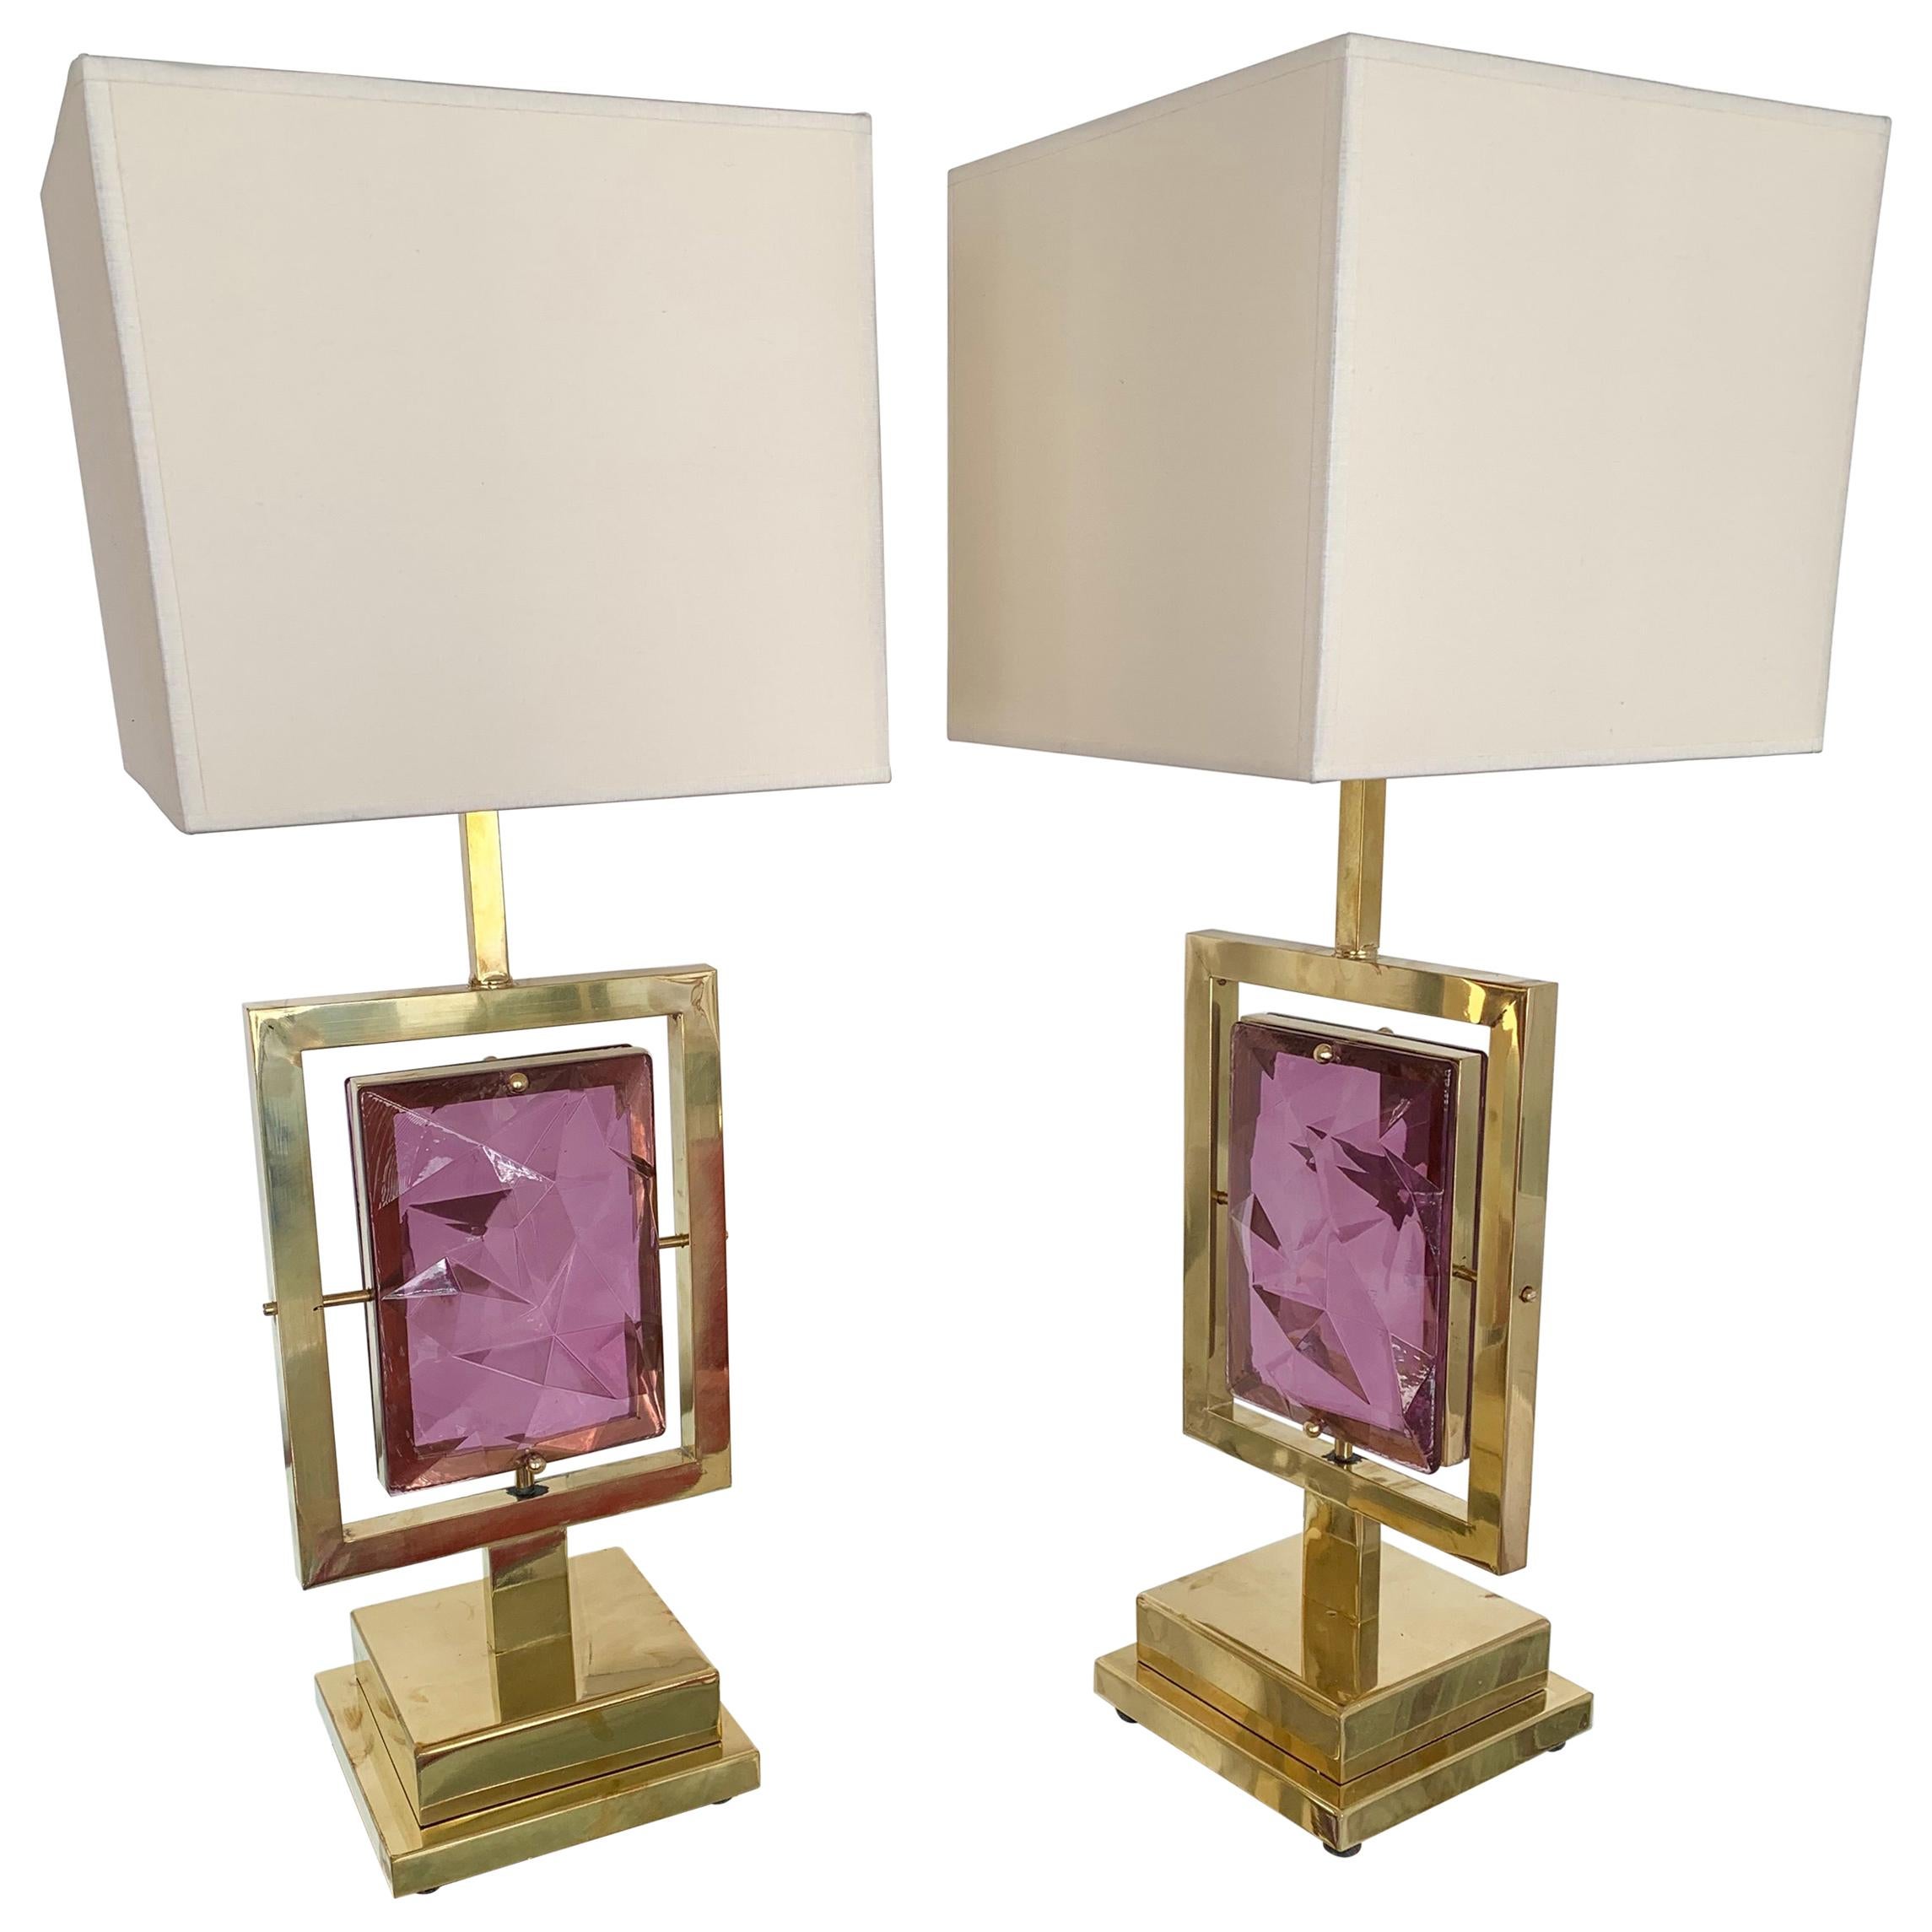 Contemporary Pair of Brass Lamps Murano Glass, Italy